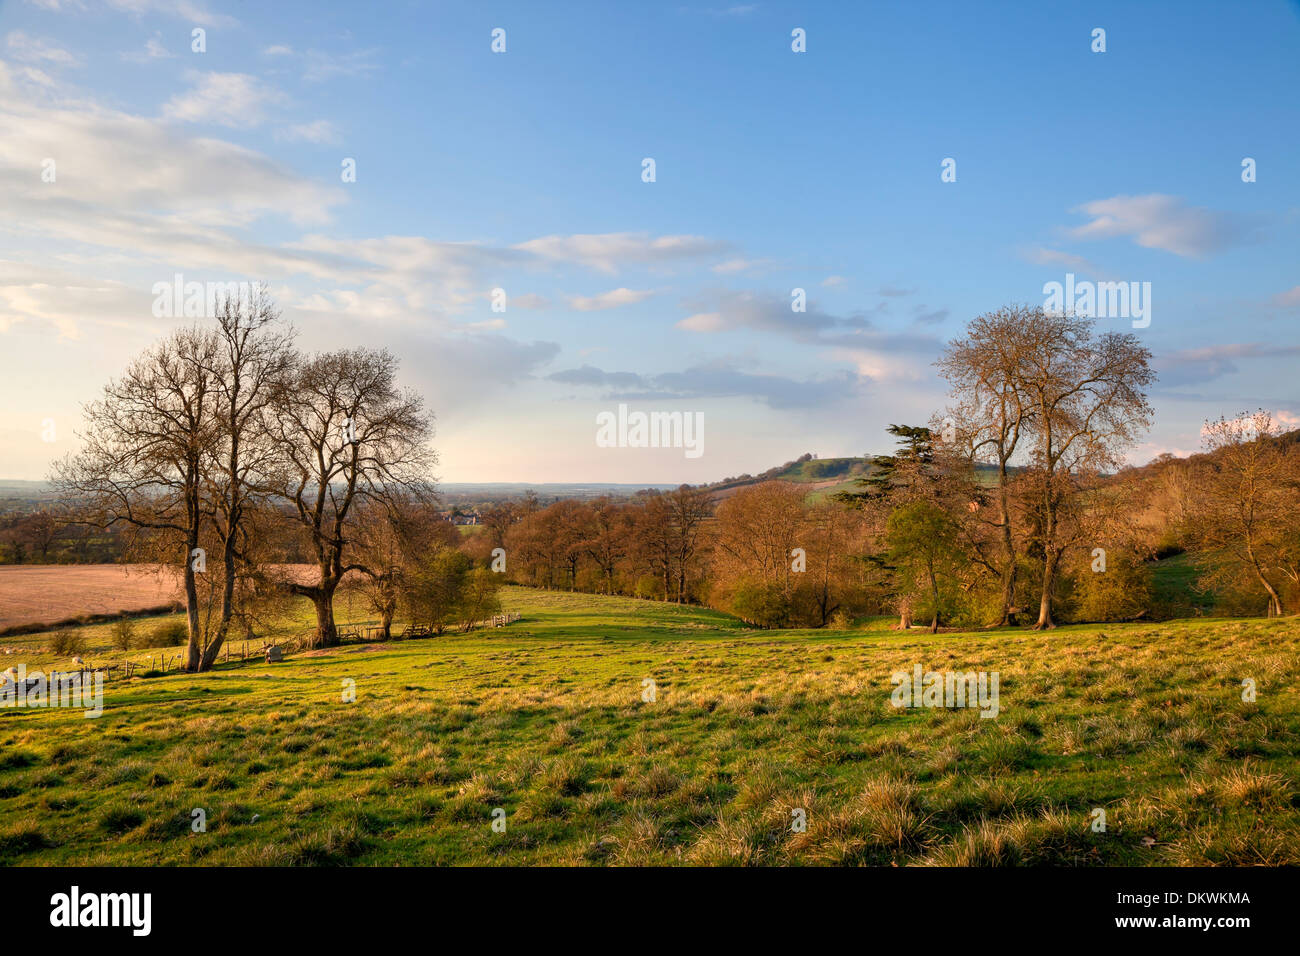 Looking towards Meon Hill from Kiftsgate. Chipping Campden, Gloucestershire, England. Stock Photo